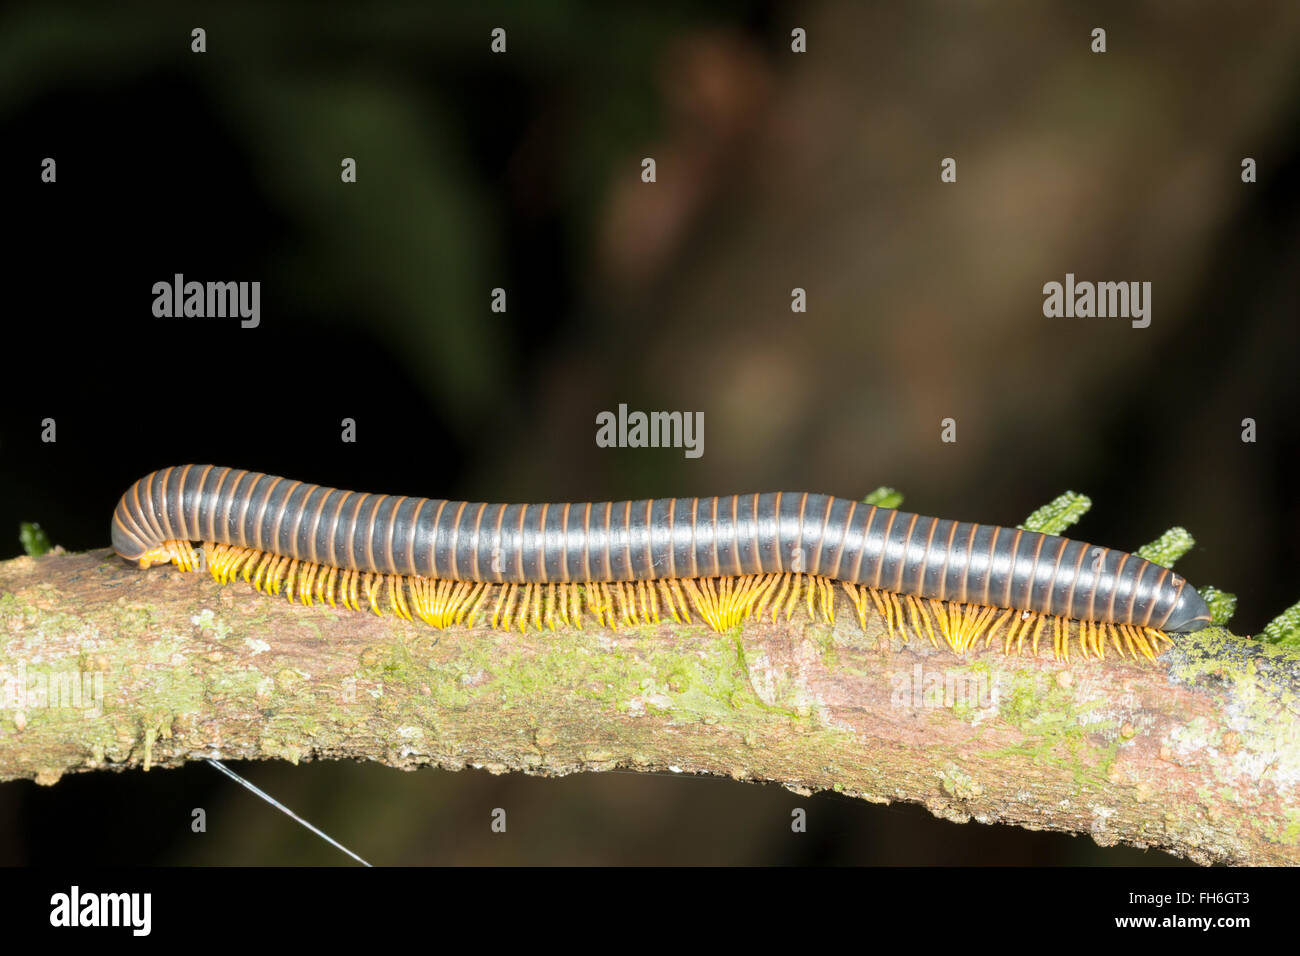 A large millipede (Diplopoda) crawling along a rainforest branch in Pastaza province, Ecuador. Stock Photo